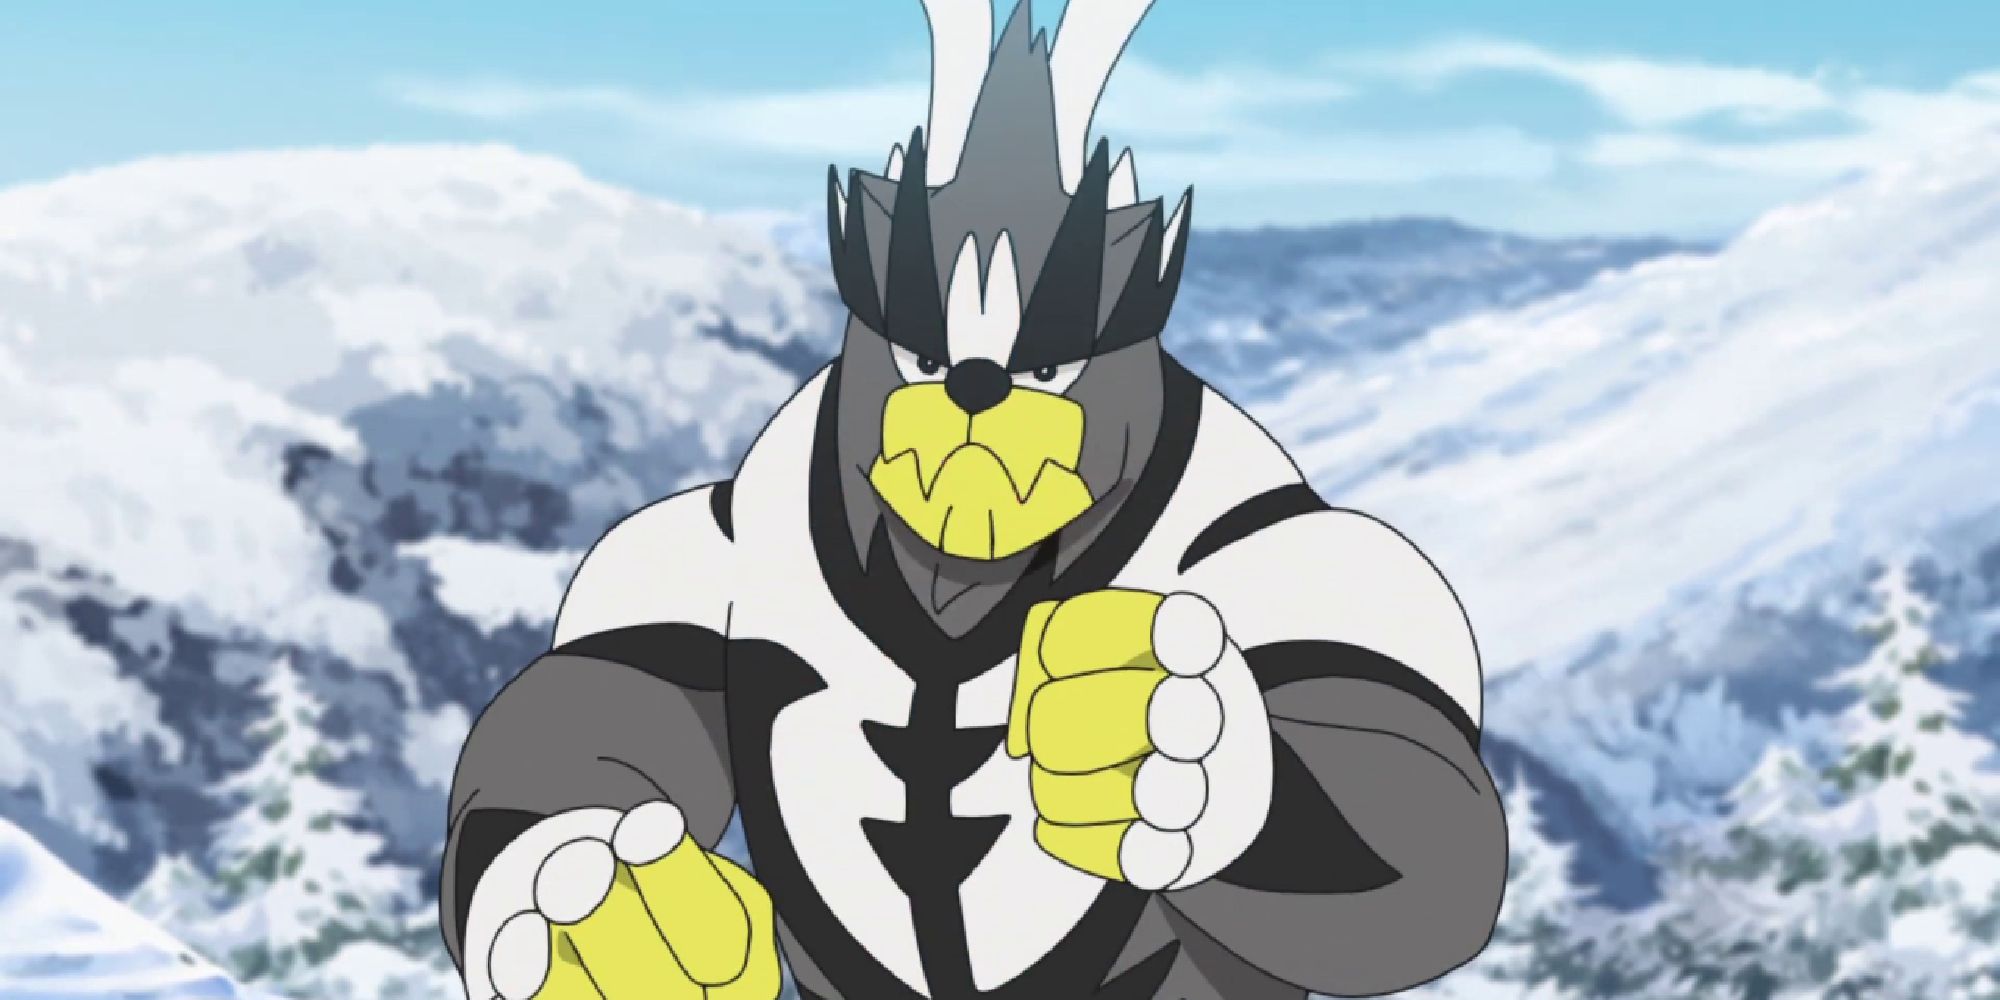 Urshifu standing ready for battle in a snowy field in the anime